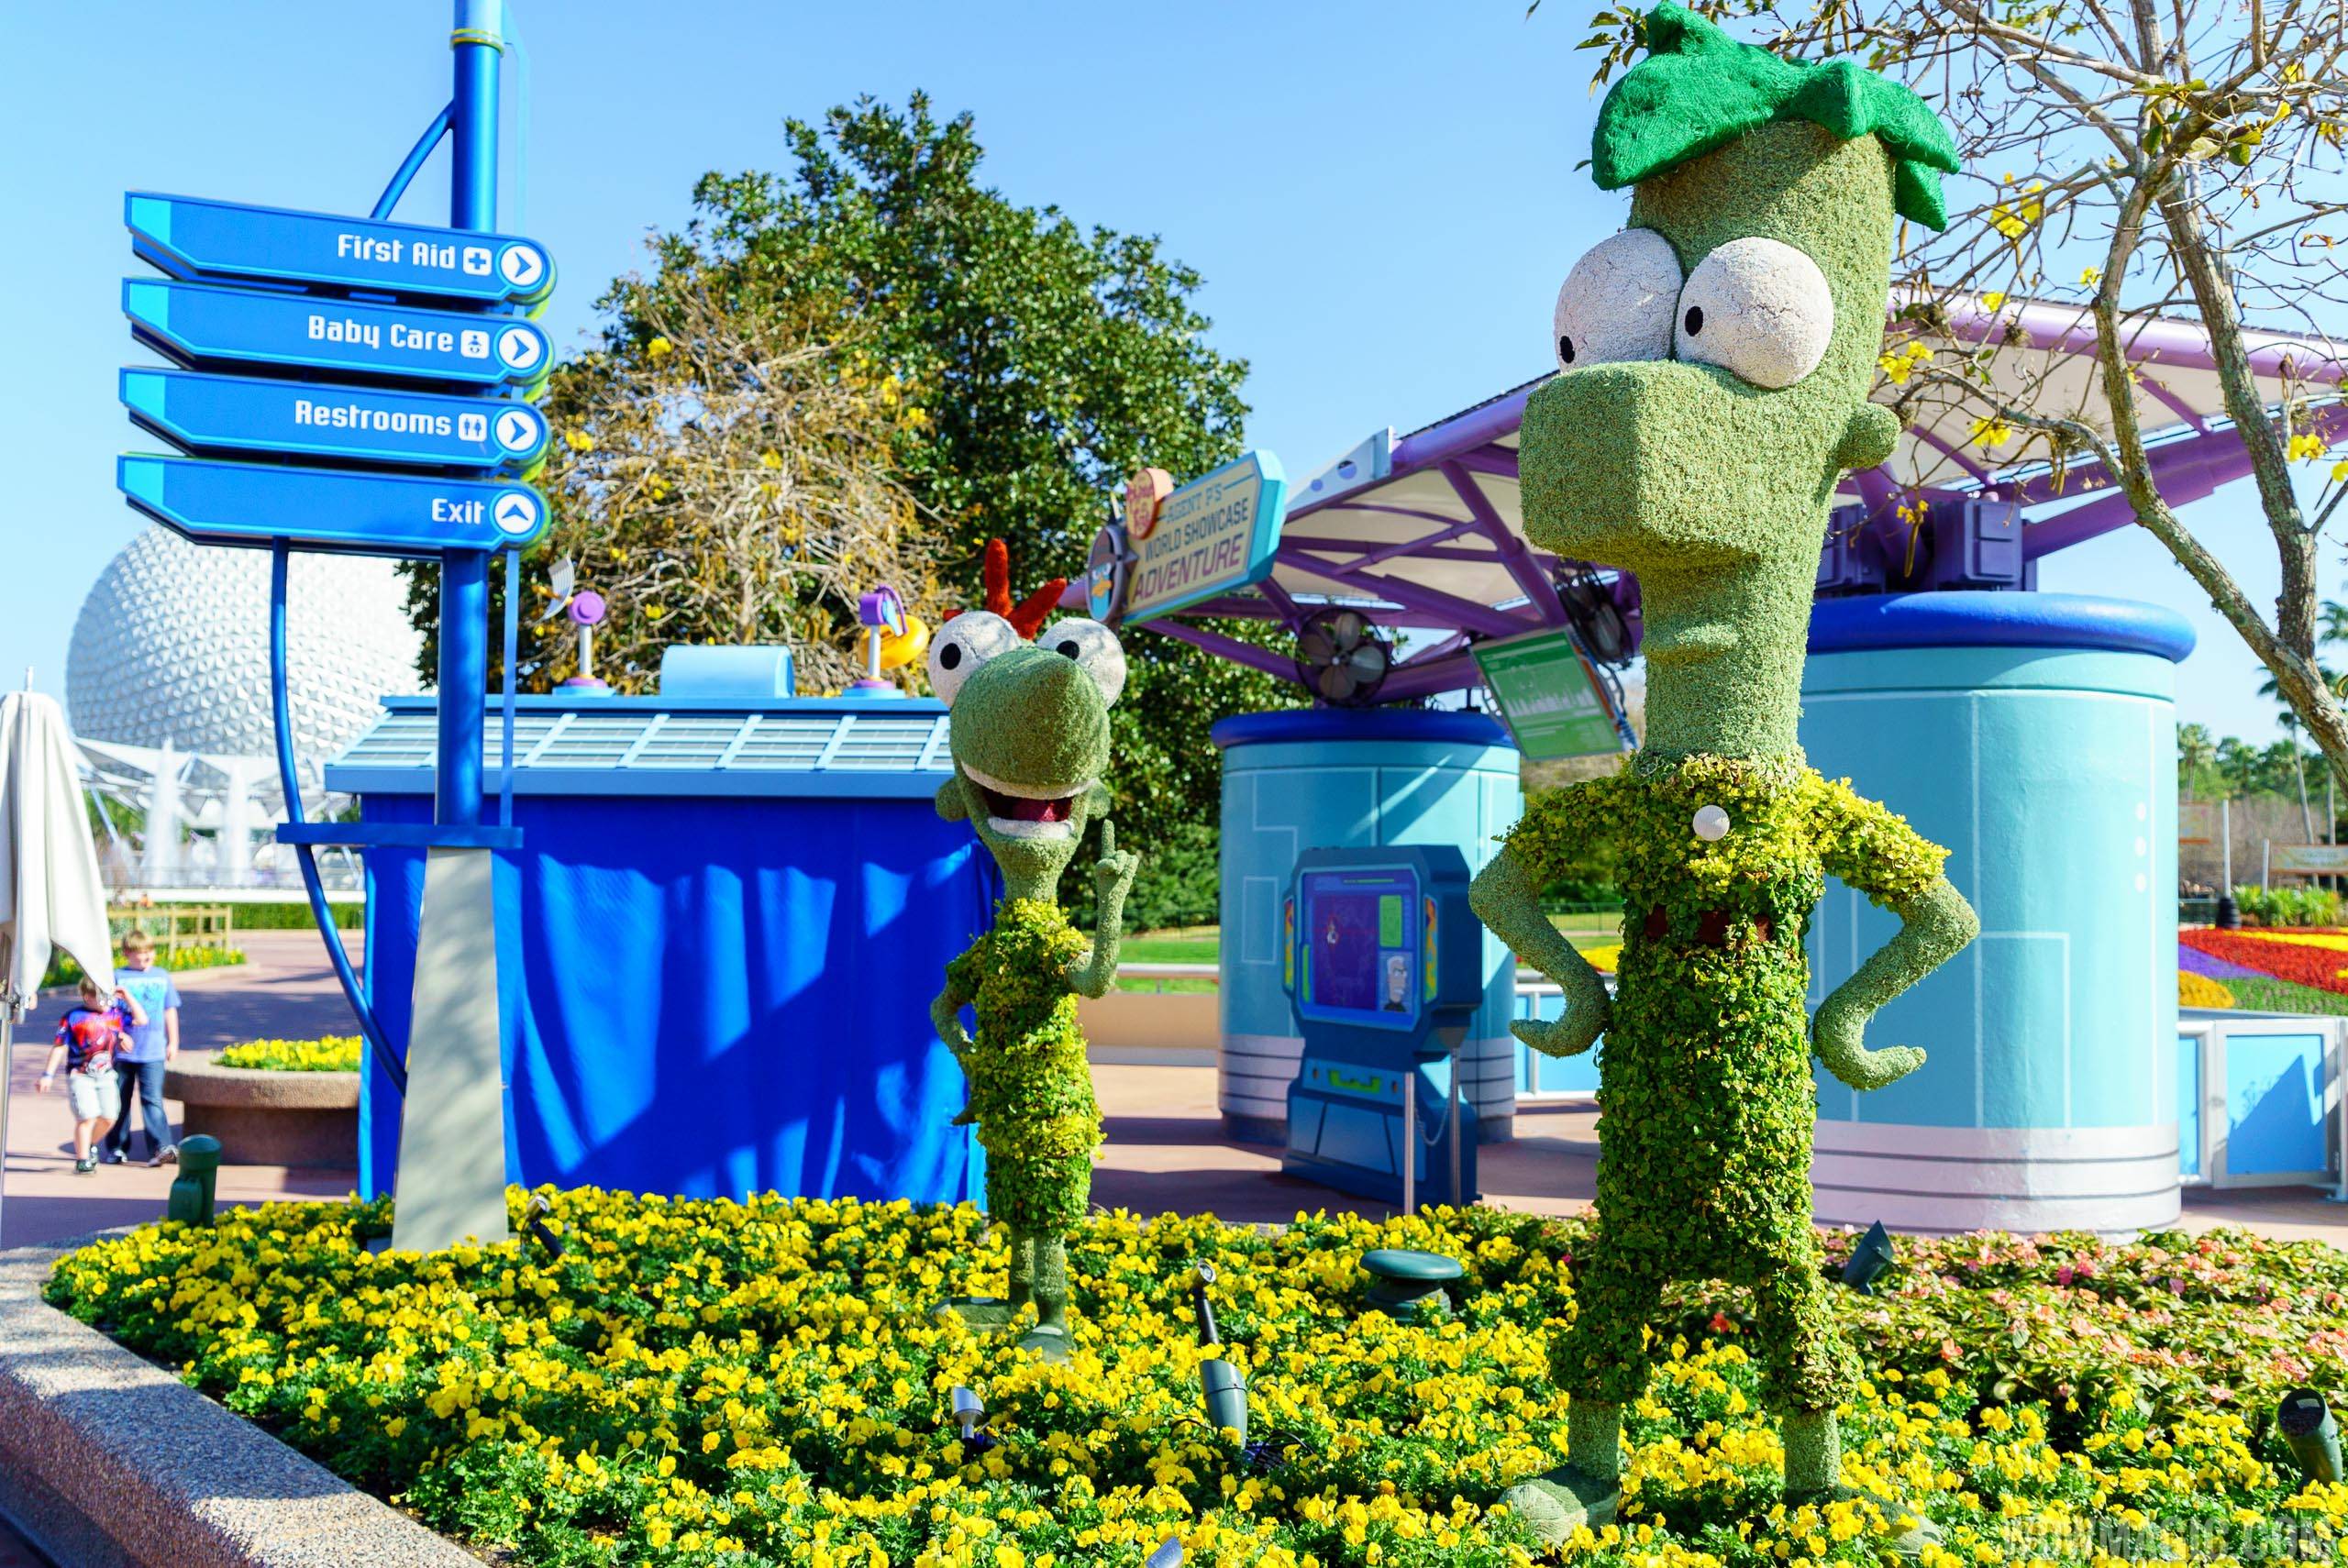 2016 Epcot International Flower and Garden Festival - Phineas and Ferb topiaries